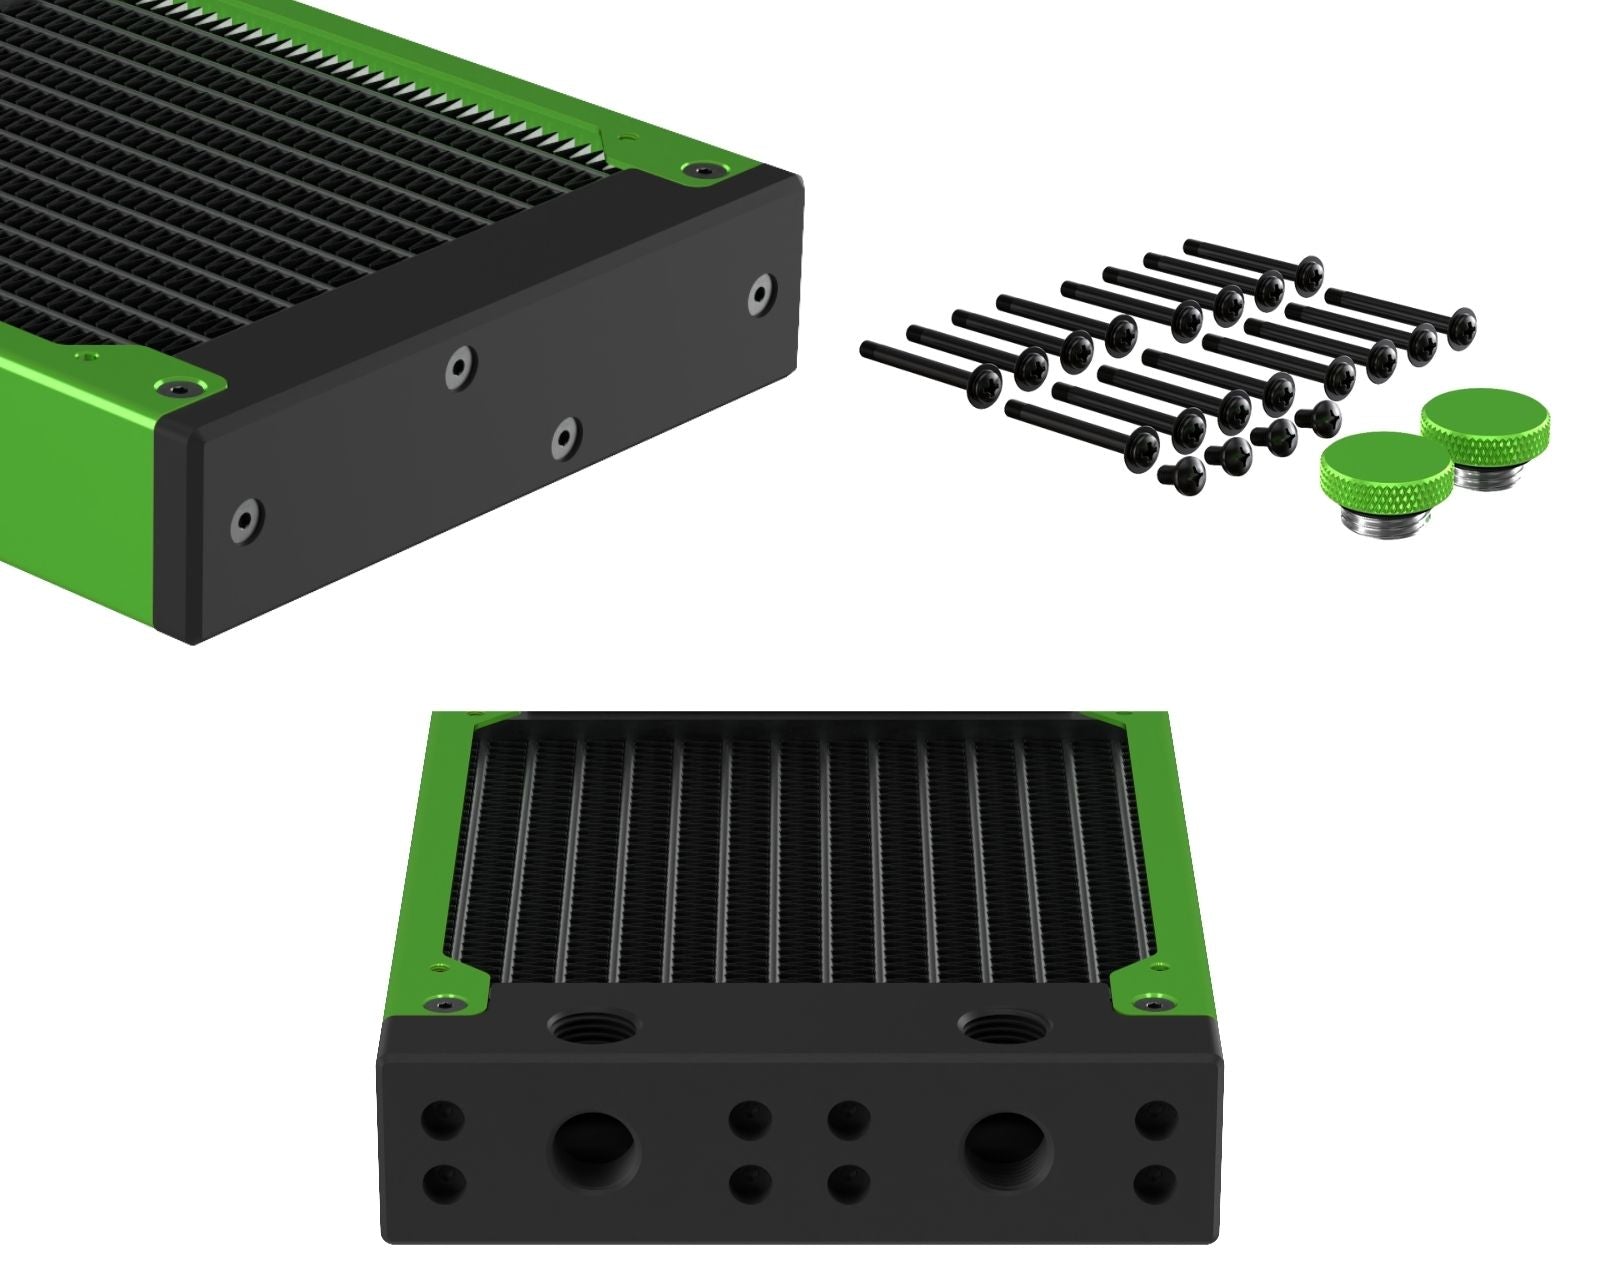 PrimoChill 480SL (30mm) EXIMO Modular Radiator, Black POM, 4x120mm, Quad Fan (R-SL-BK48) Available in 20+ Colors, Assembled in USA and Custom Watercooling Loop Ready - Toxic Candy